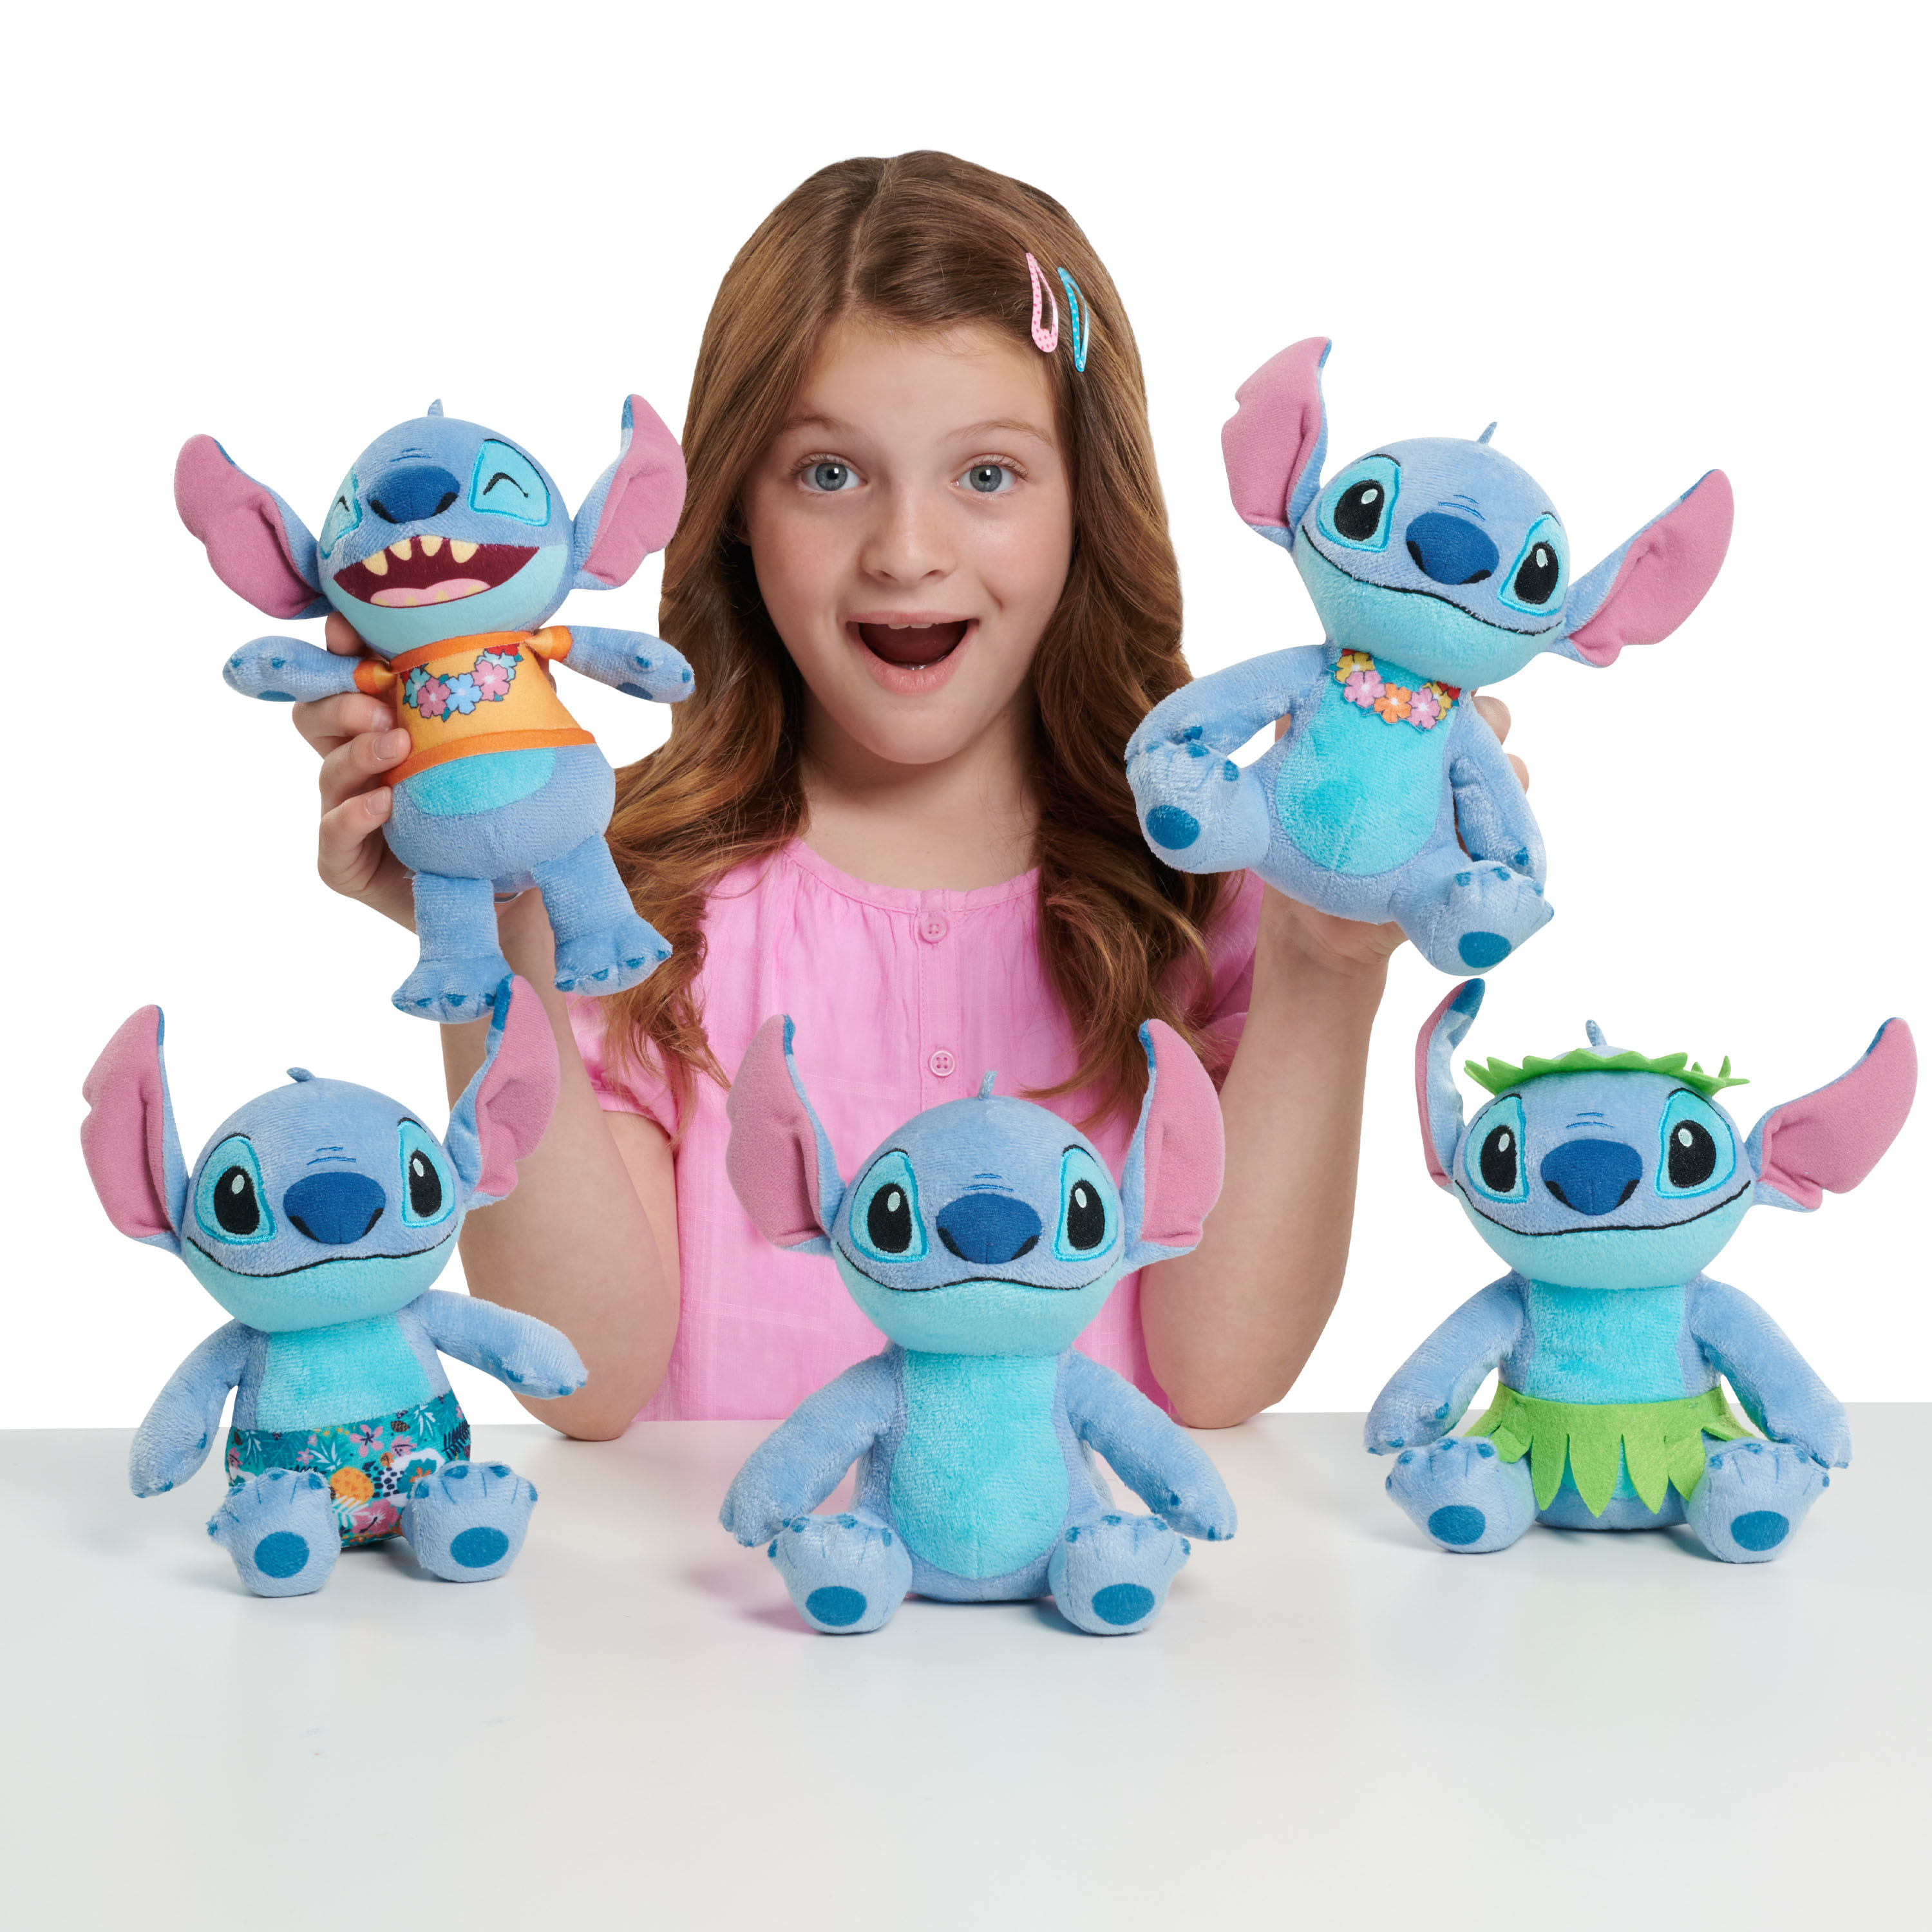 Disney Stitch Plush Collector Set, Officially Licensed Kids Toys for Ages 3 Up, Gifts and Presents - image 2 of 4